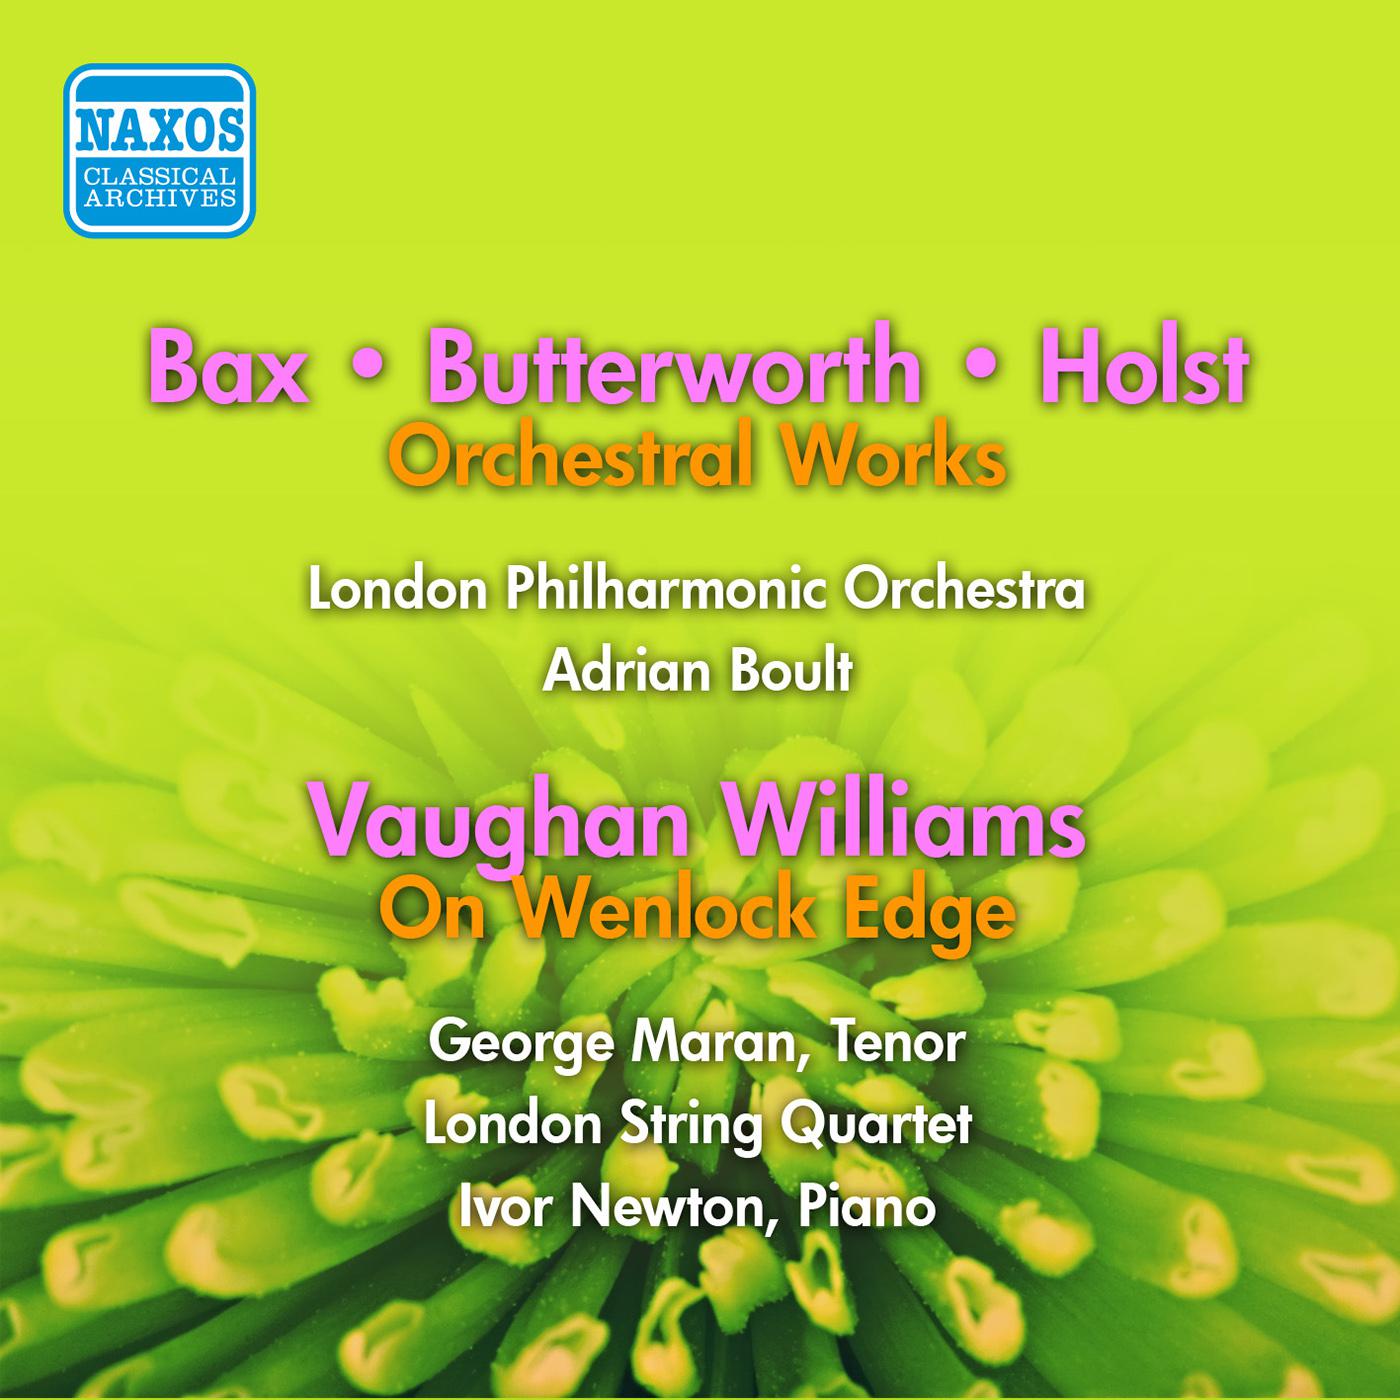 VAUGHAN WILLIAMS: On Wenlock Edge / BAX: Tintagel / BUTTERWORTH: The Banks of Green Willow / A Shropshire Lad (Boult) (1955, 1956)